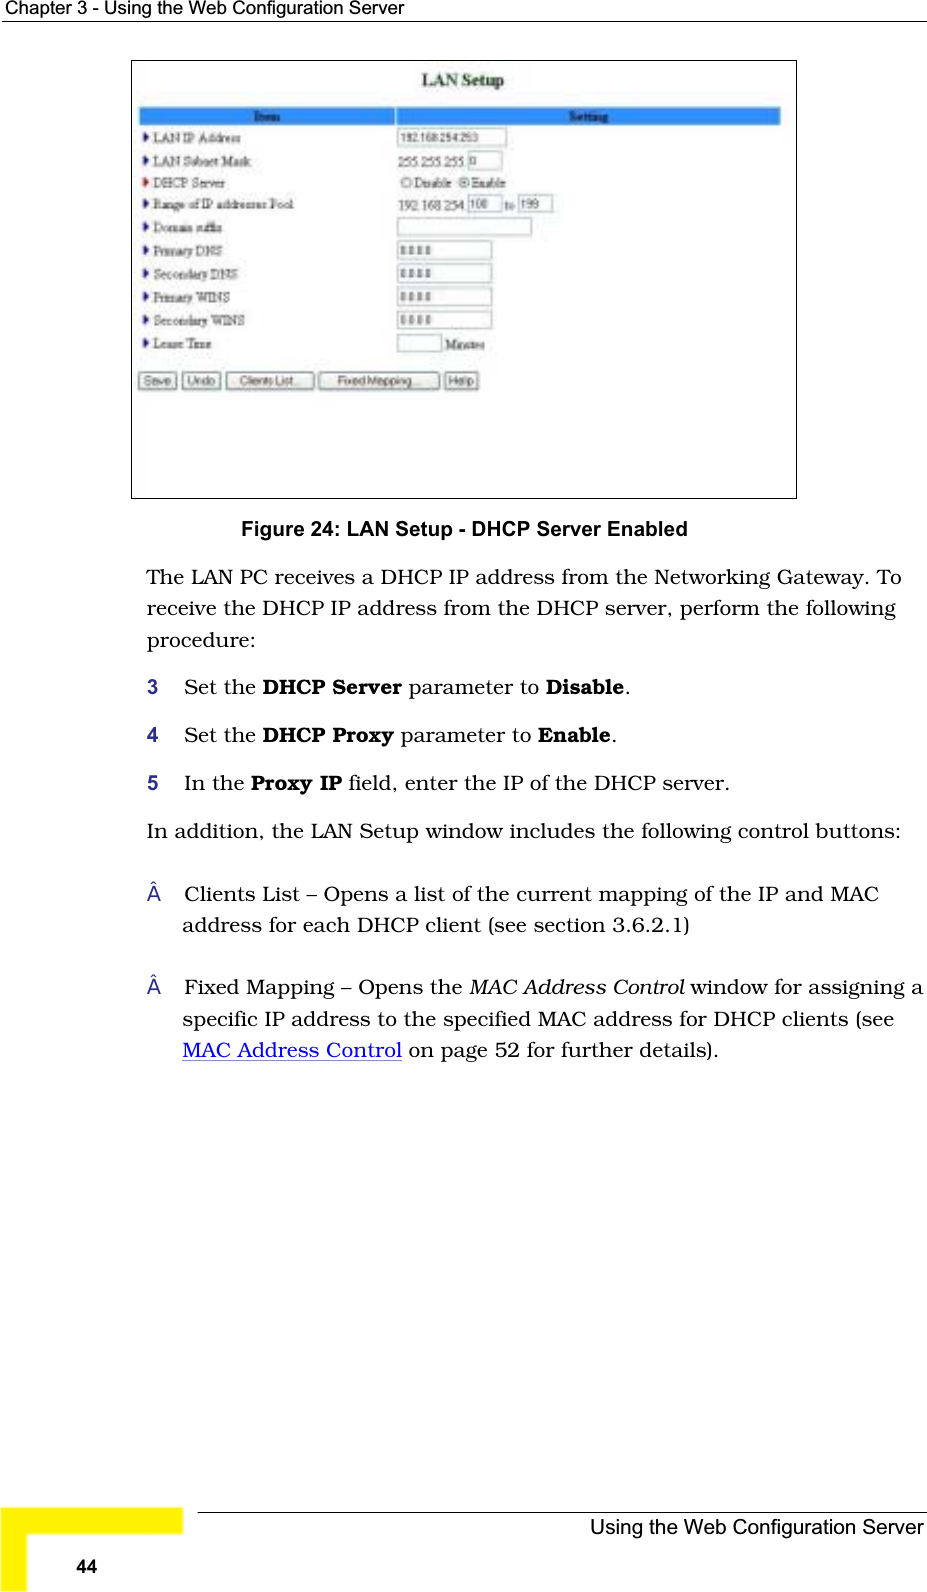 Chapter 3 - Using the Web Configuration ServerFigure 24: LAN Setup - DHCP Server Enabled The LAN PC receives a DHCP IP address from the Networking Gateway. To receive the DHCP IP address from the DHCP server, perform the followingprocedure:3Set the DHCP Server parameter to Disable.4Set the DHCP Proxy parameter to Enable.5In the Proxy IP field, enter the IP of the DHCP server.In addition, the LAN Setup window includes the following control buttons:Clients List – Opens a list of the current mapping of the IP and MAC address for each DHCP client (see section 3.6.2.1)Fixed Mapping – Opens the MAC Address Control window for assigning a specific IP address to the specified MAC address for DHCP clients (seeMAC Address Control on page 52 for further details).Using the Web Configuration Server44